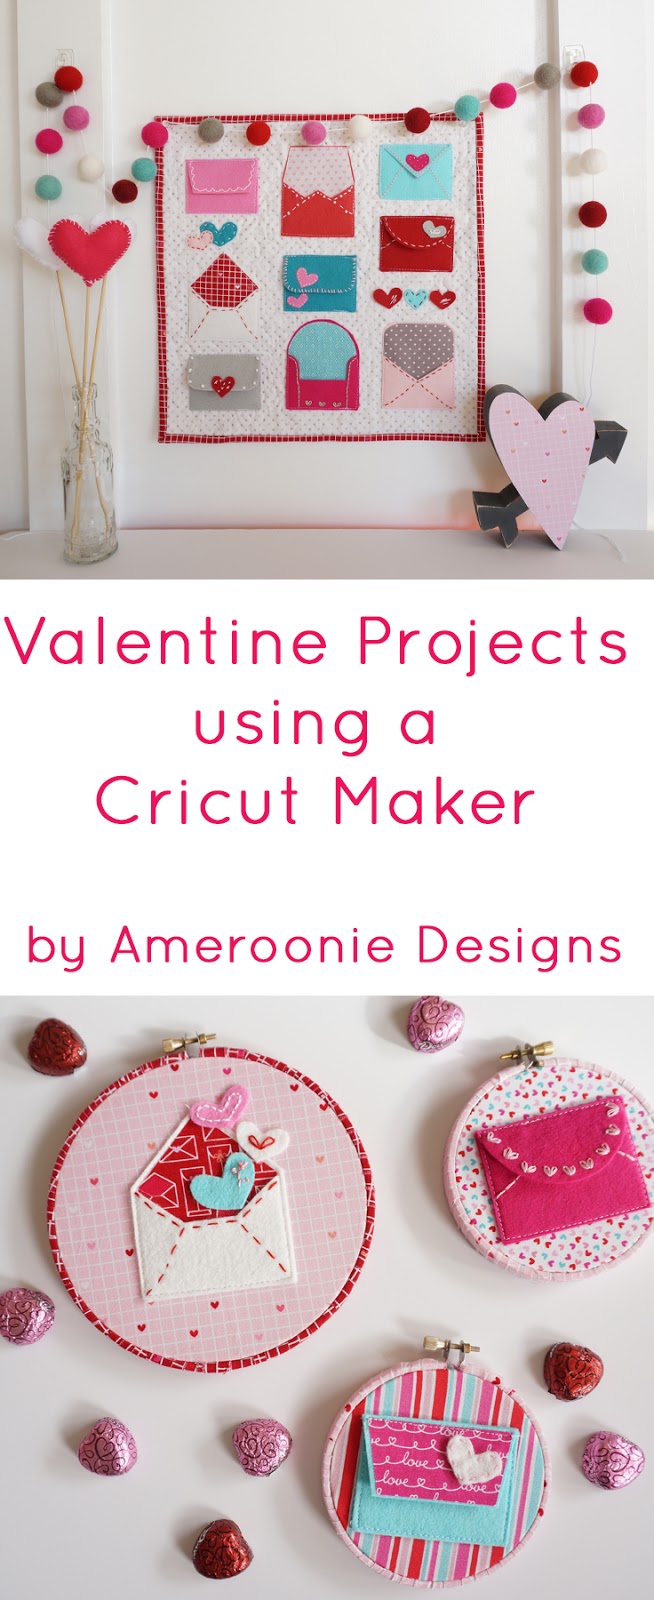 Amazing Cricut Projects to make at home - Ameroonie Designs